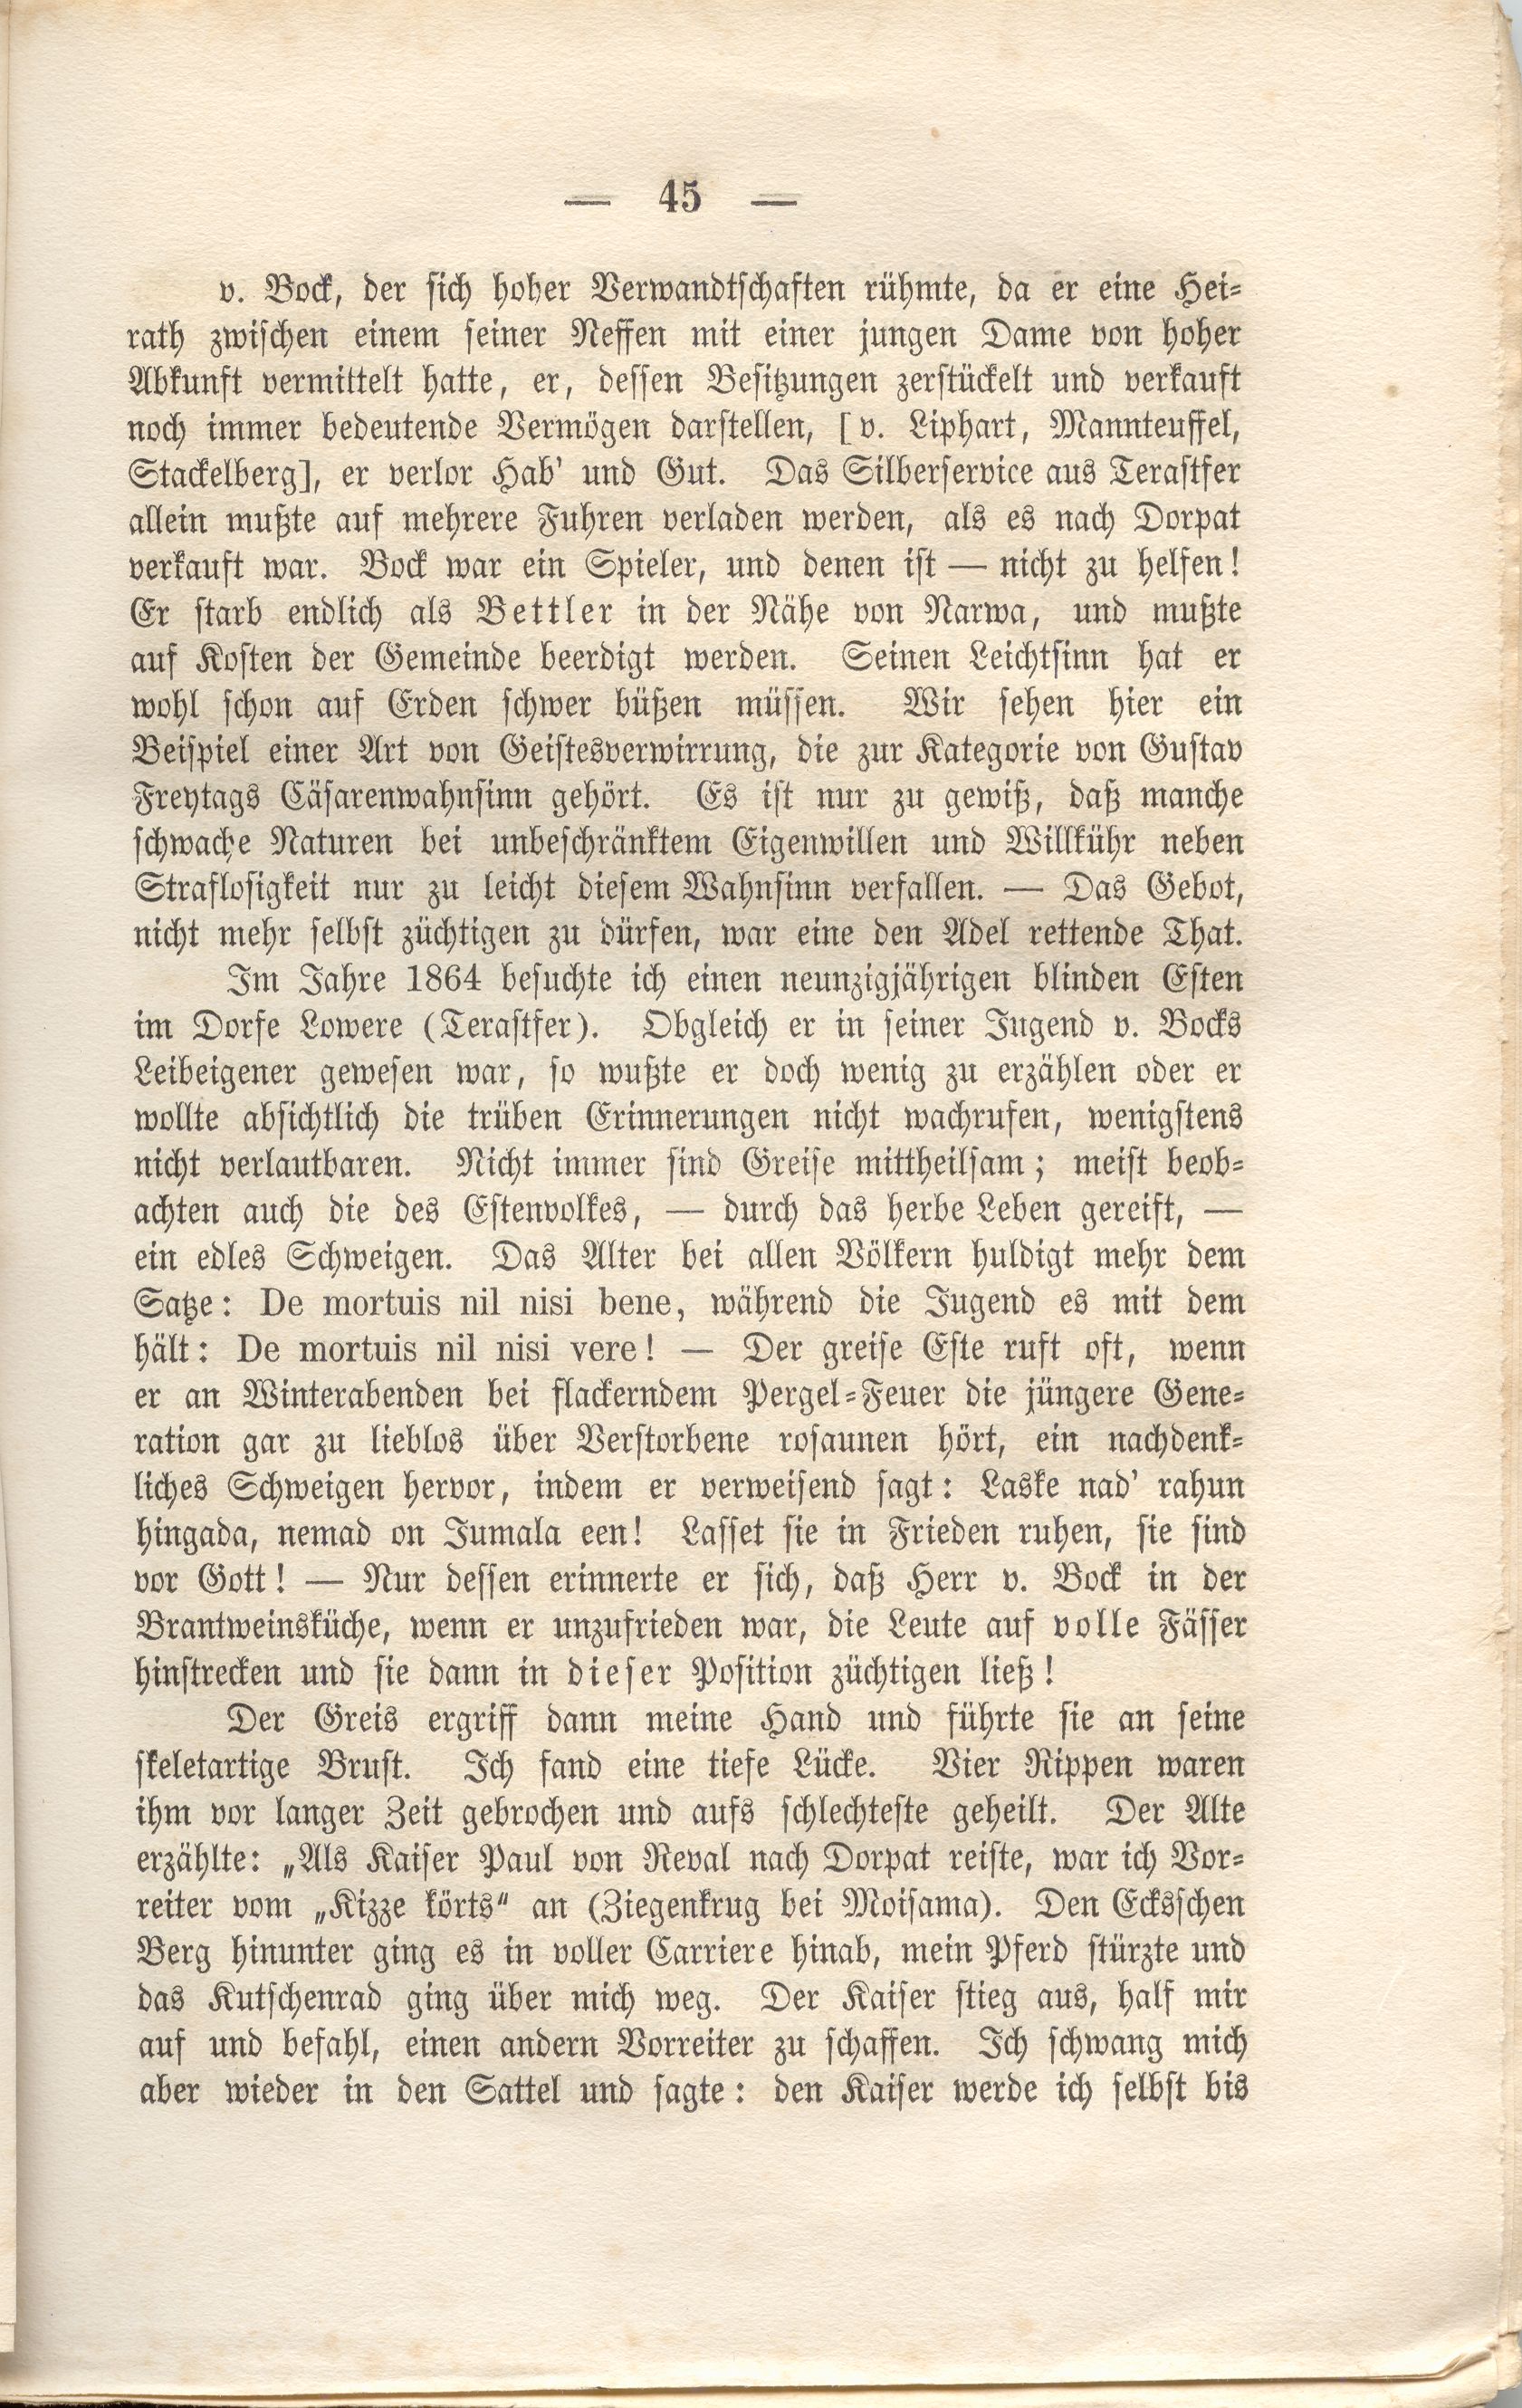 Wagien (1868) | 49. (45) Main body of text